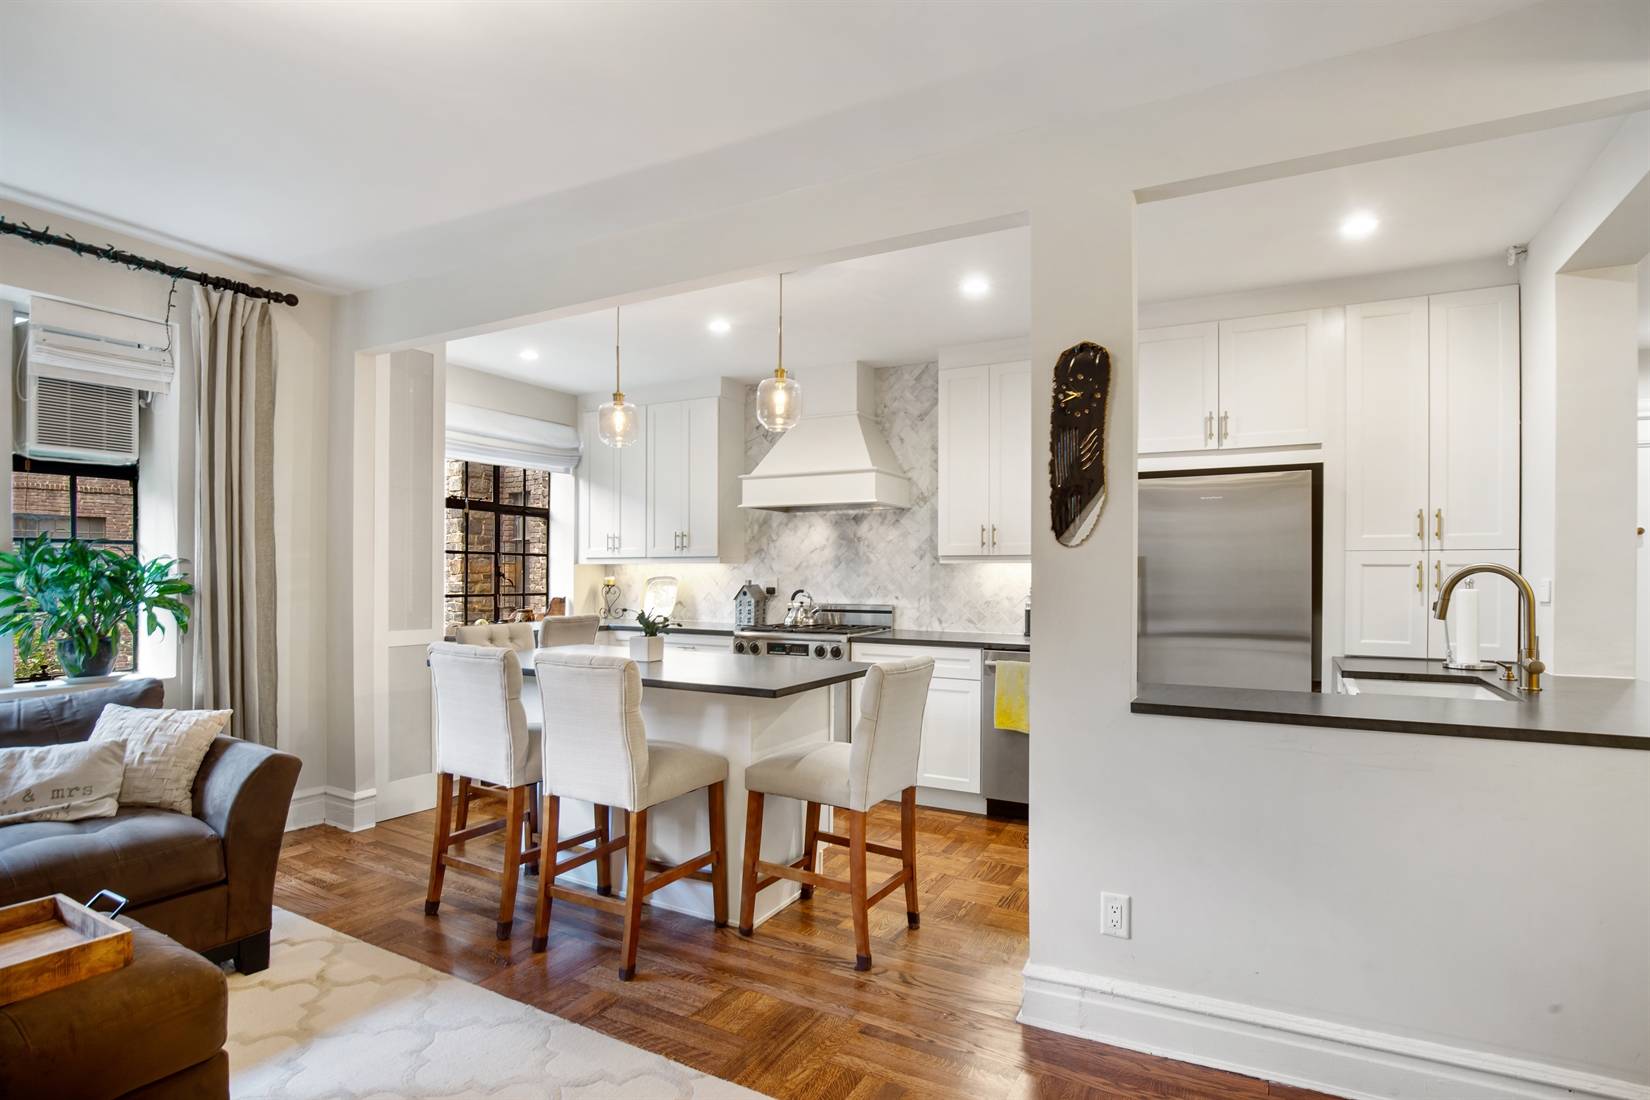 This stunningly renovated one bedroom with home office as been impeccably designed with high end appliances, luxury finishes, and thoughtful storage solutions.